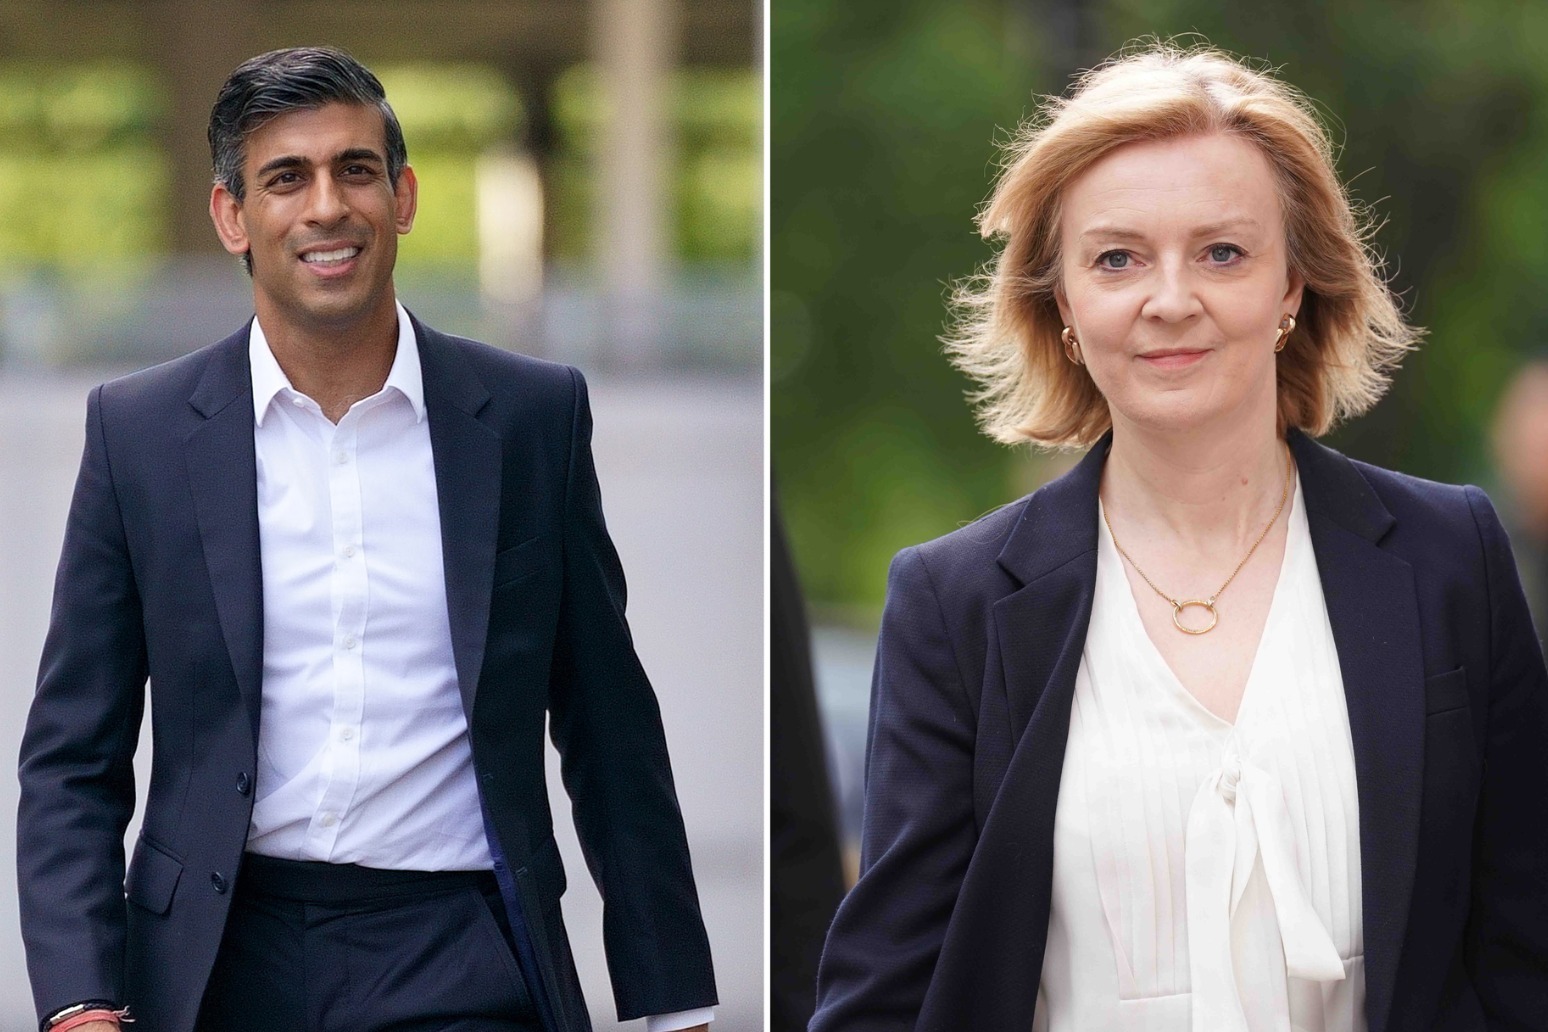 Liz Truss snubs BBC as Tory leadership race enters final stages 